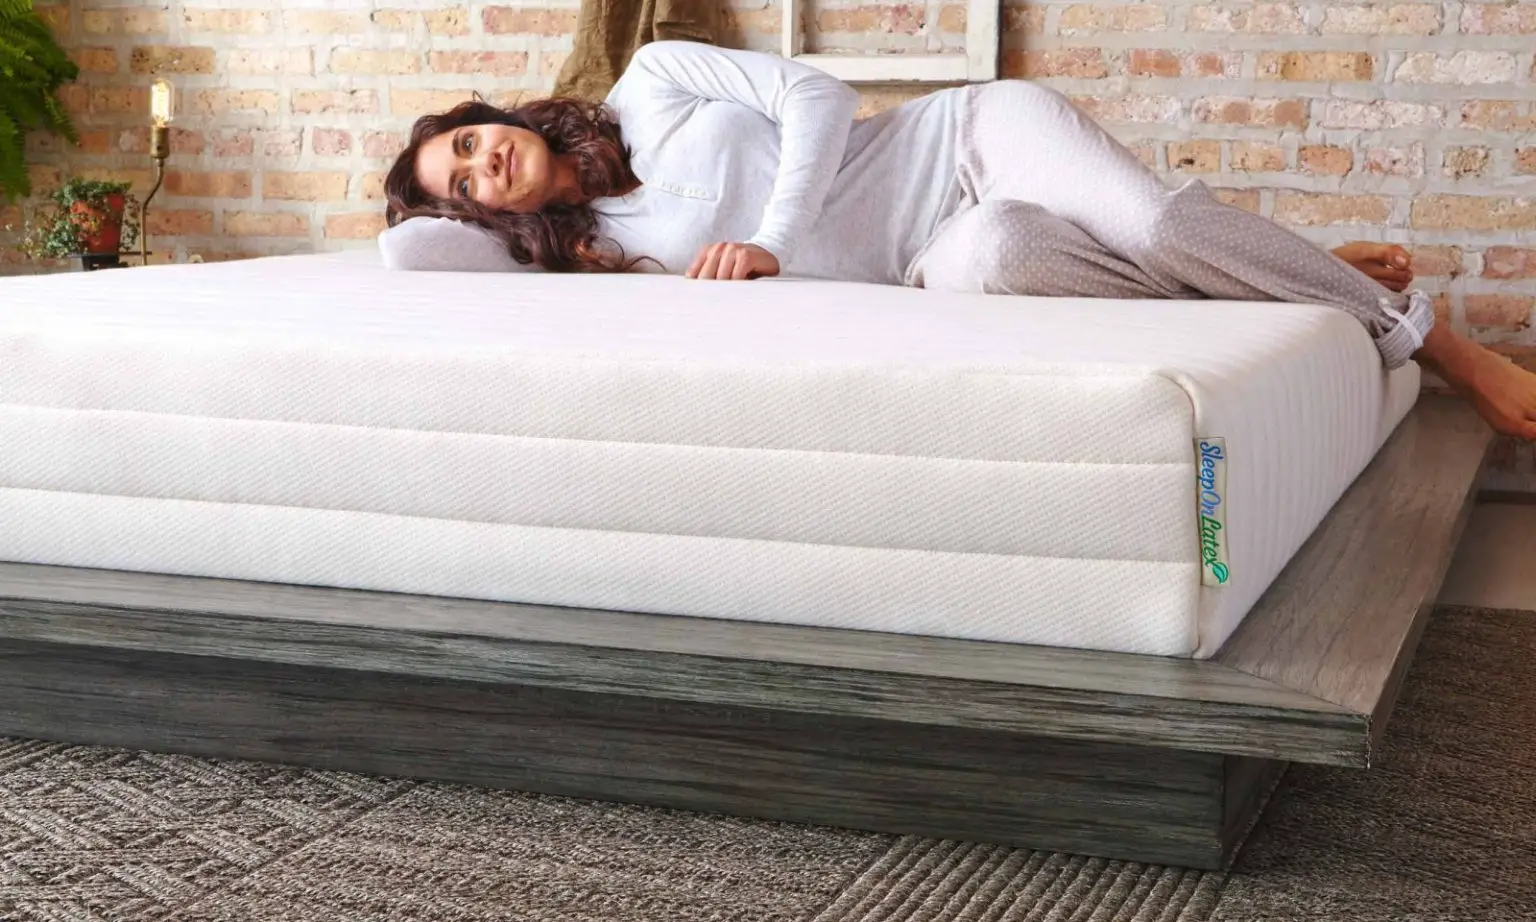 When Should You Buy a New Mattress?